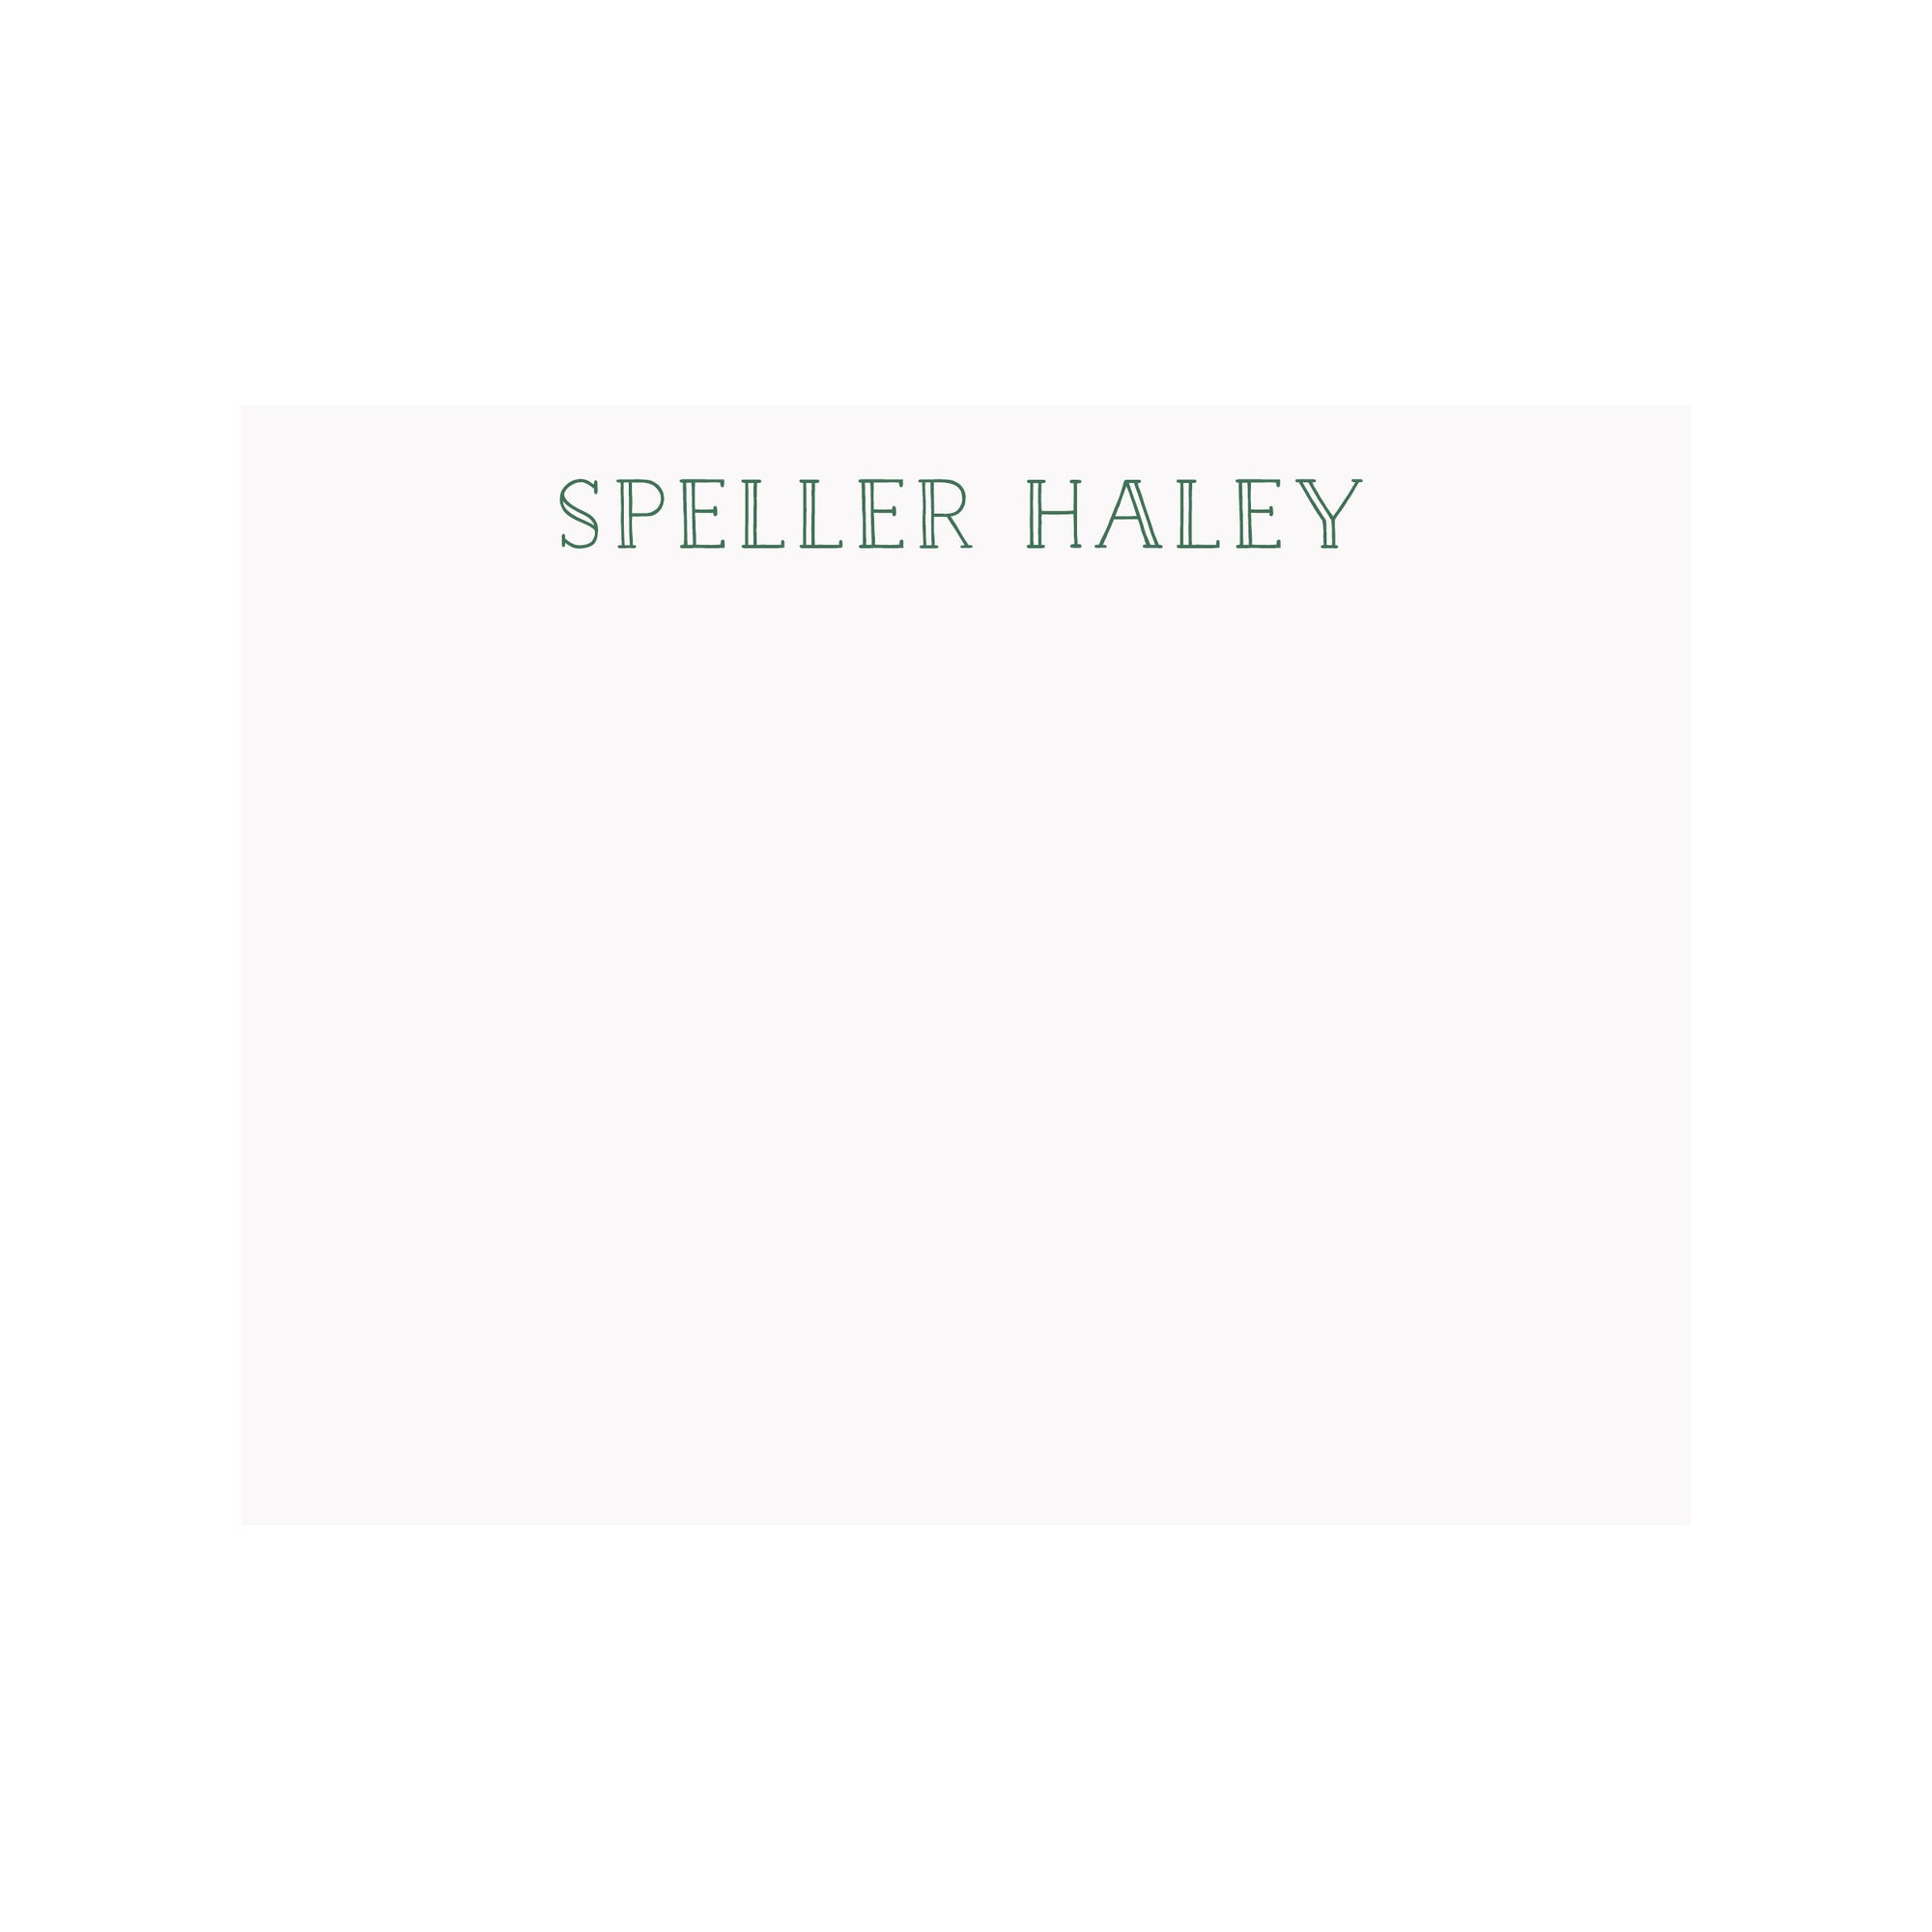 Personalized Name Stationery- Double Line